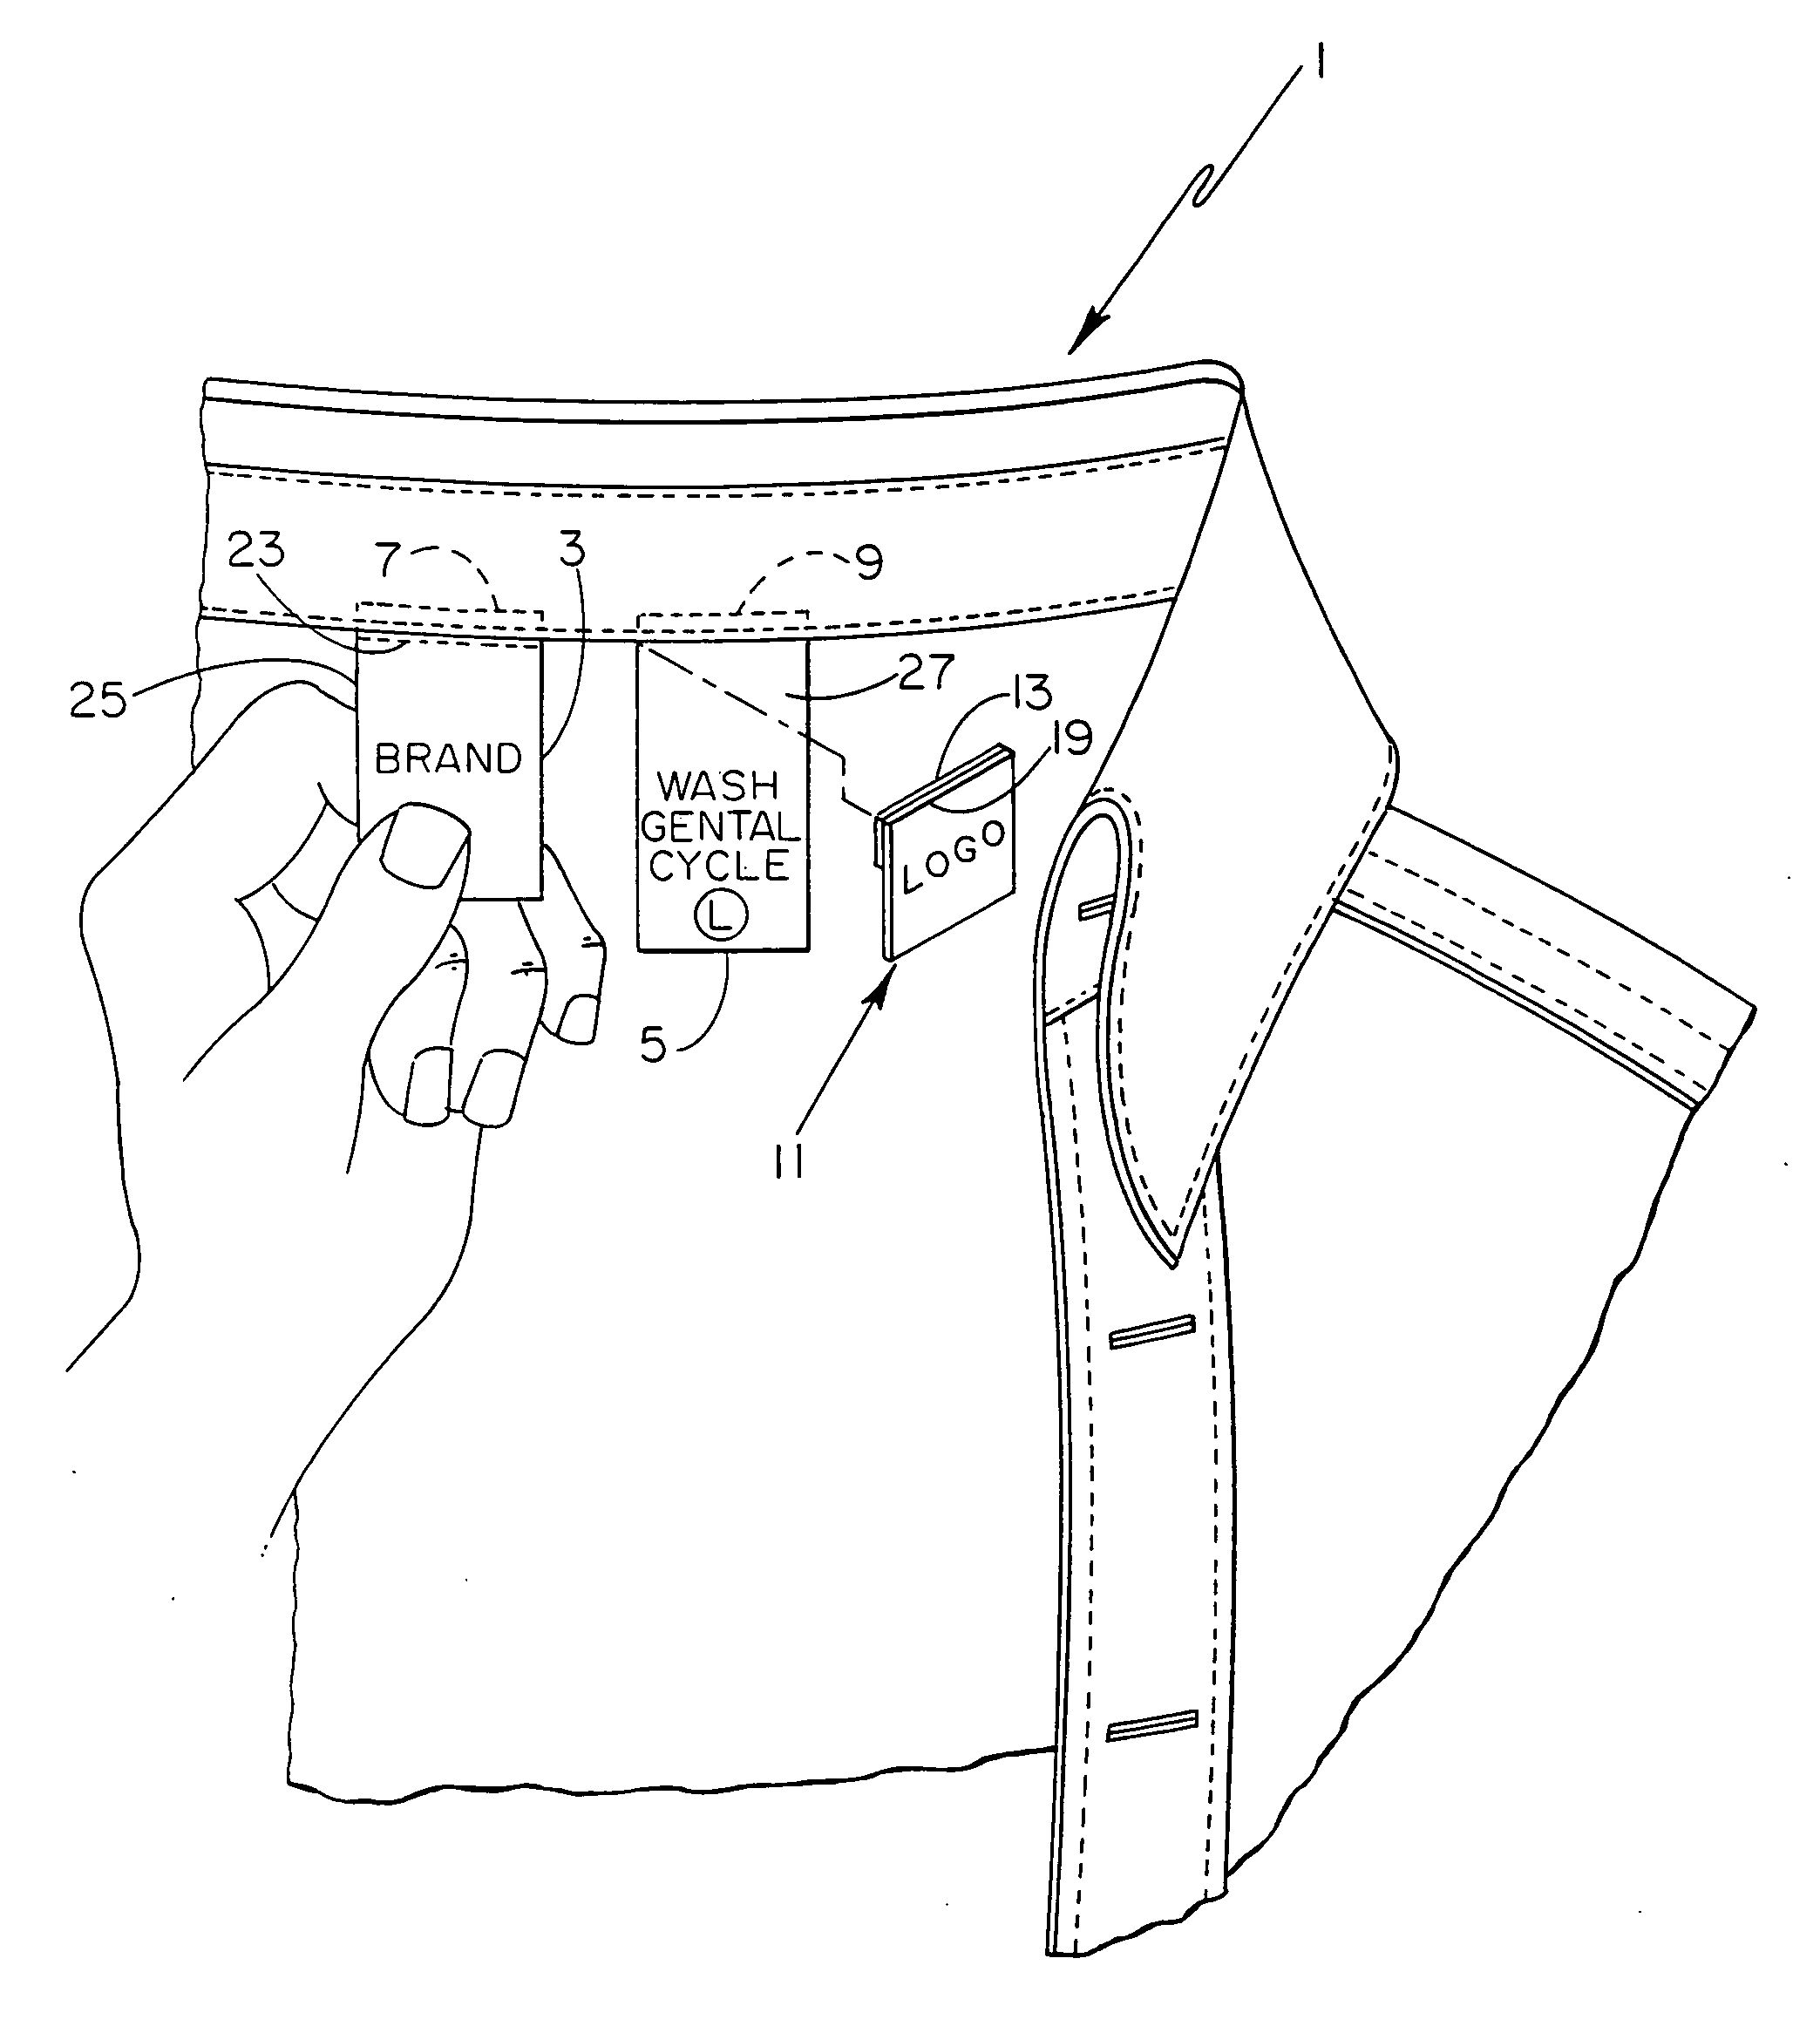 Method of private labeling a garment